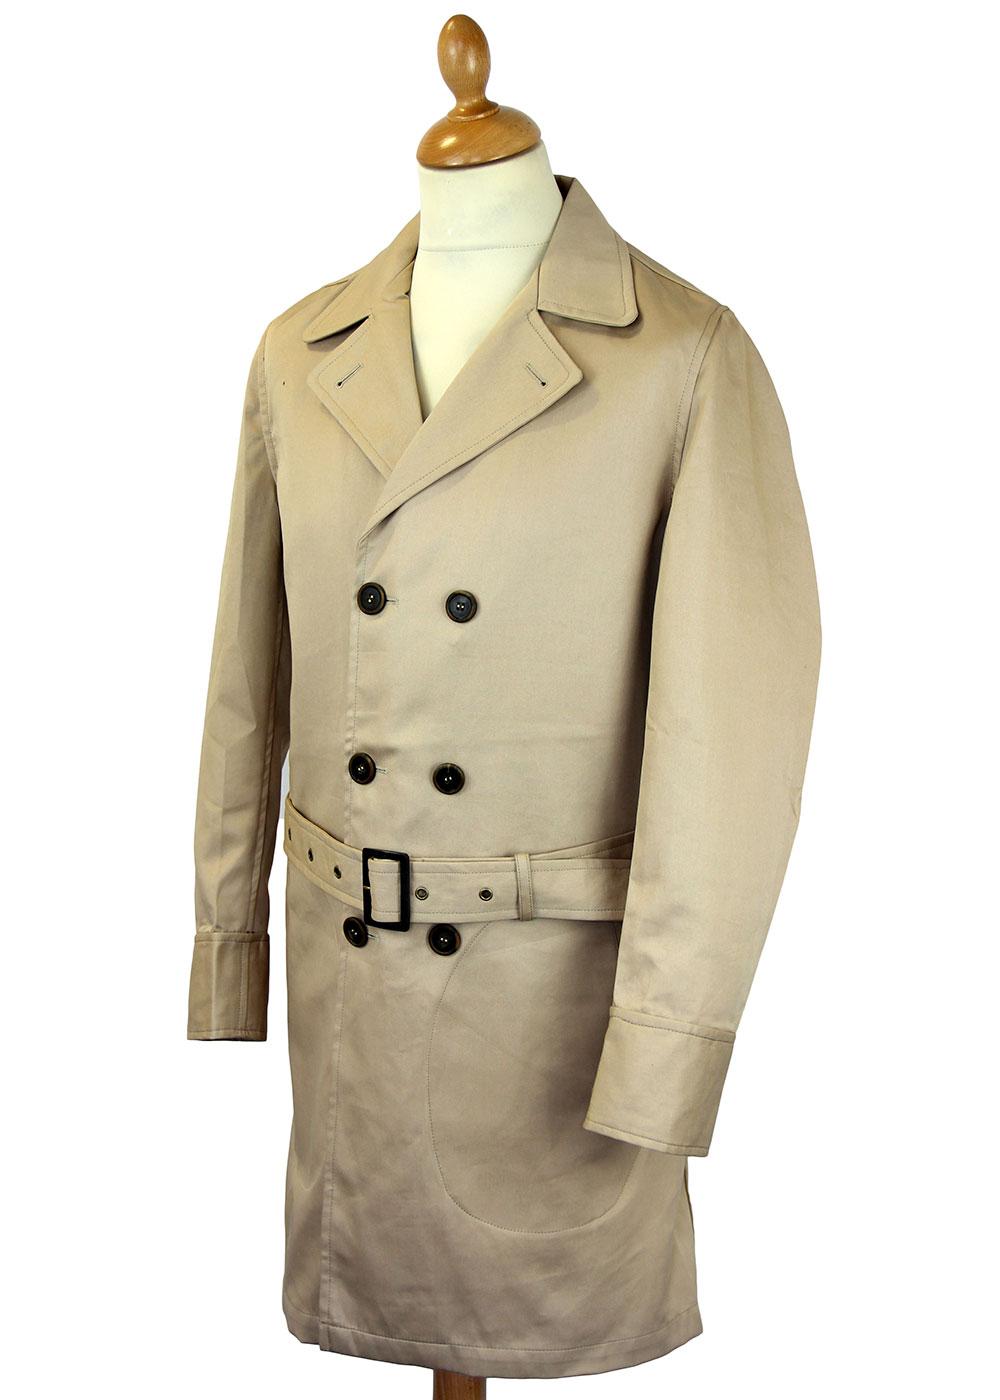 REALM & EMPIRE Retro 60s Mod Belted Officer Trench Coat in Beige